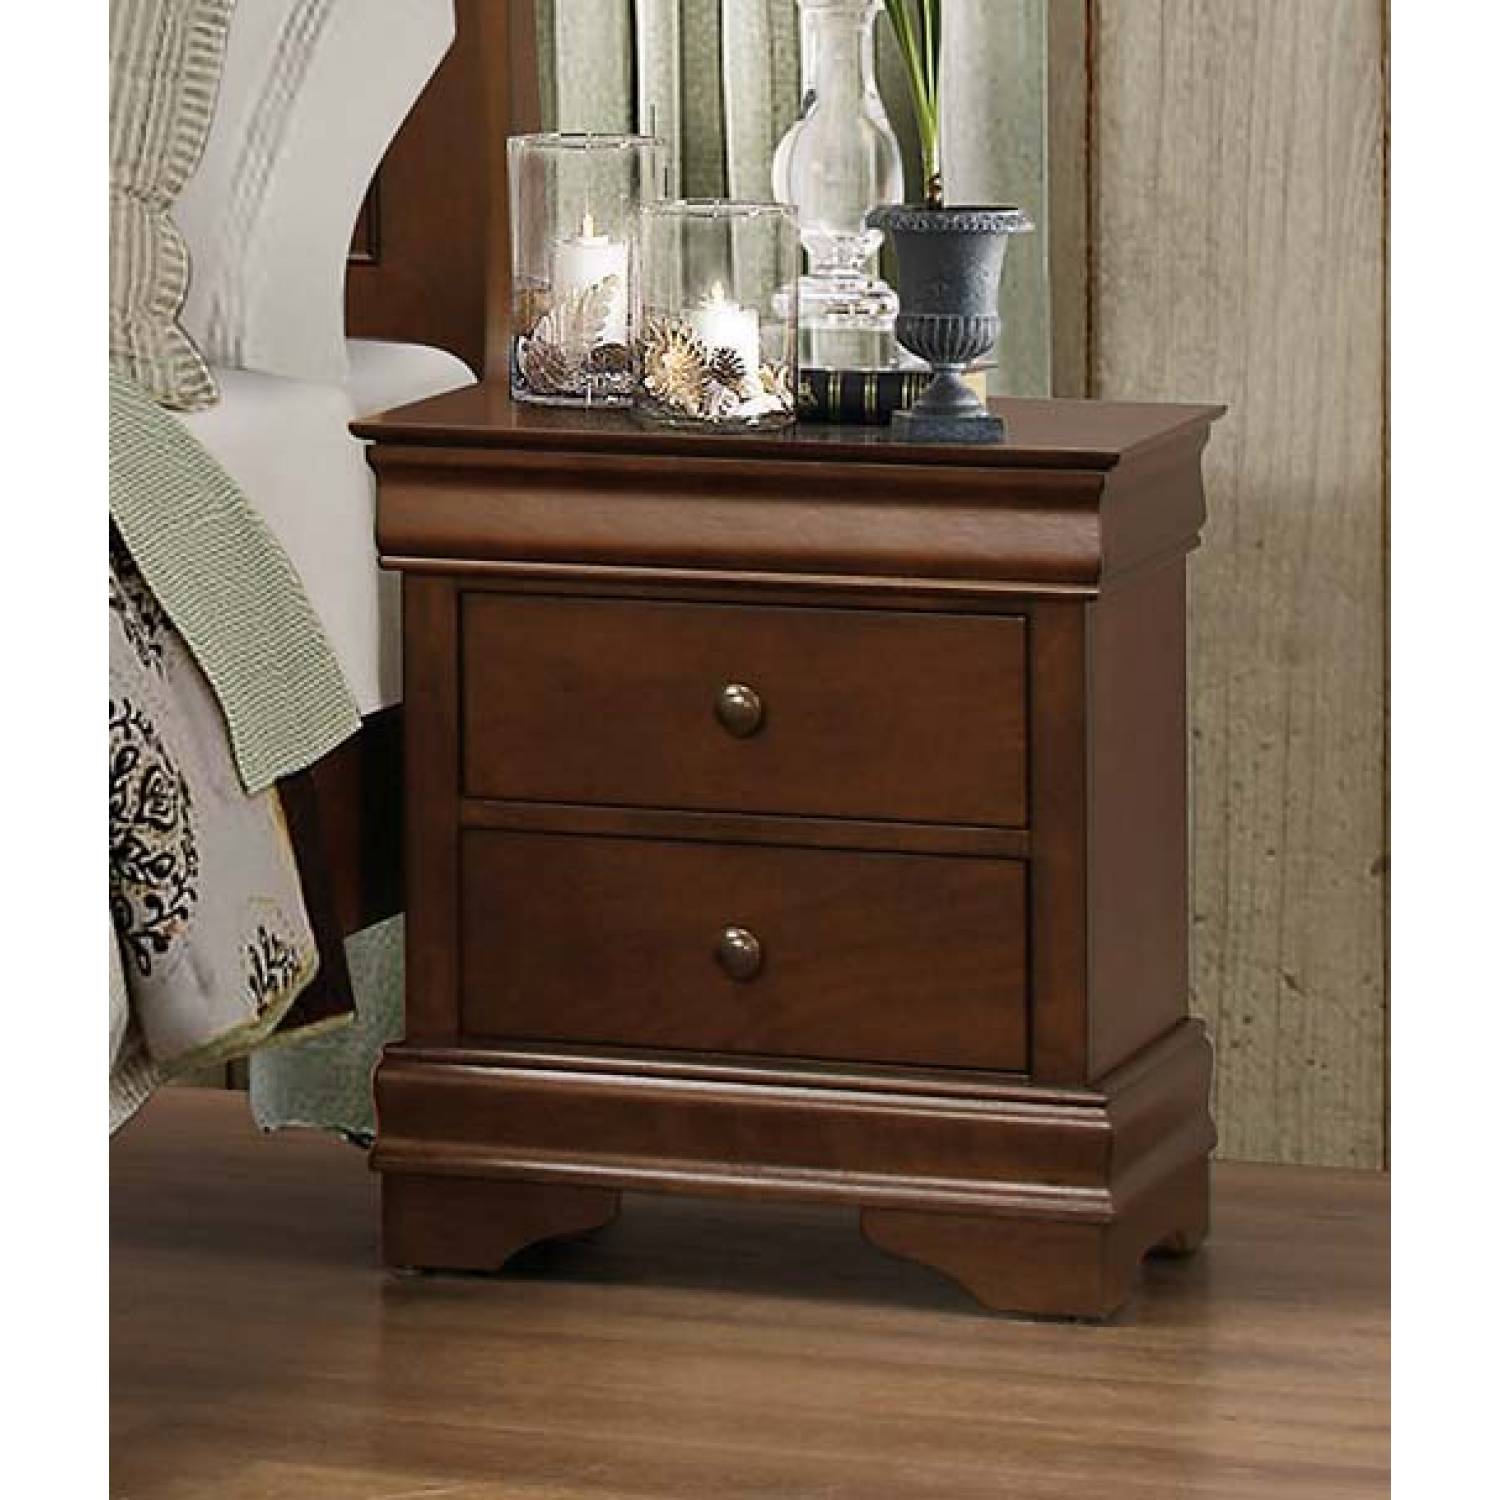 ACME Louis Philippe 5-Drawer Wooden Chest in Cherry